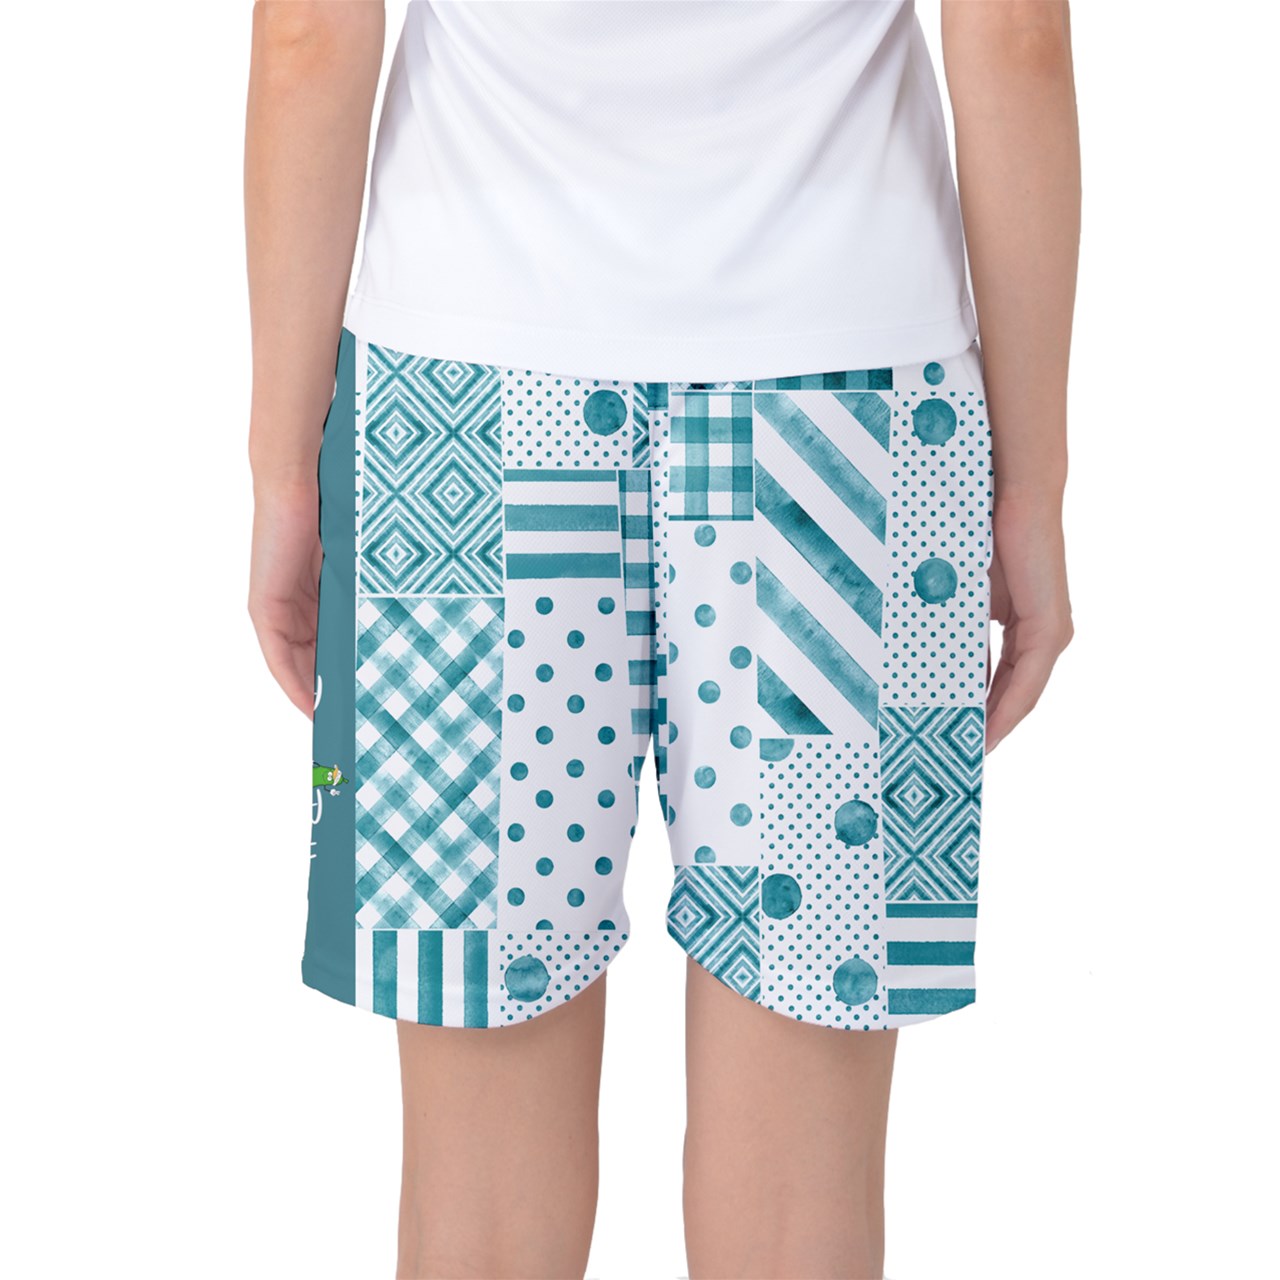 Heidi - TW - Patches - Women's Long Pickleball Athletic Shorts by Dizzy Pickle